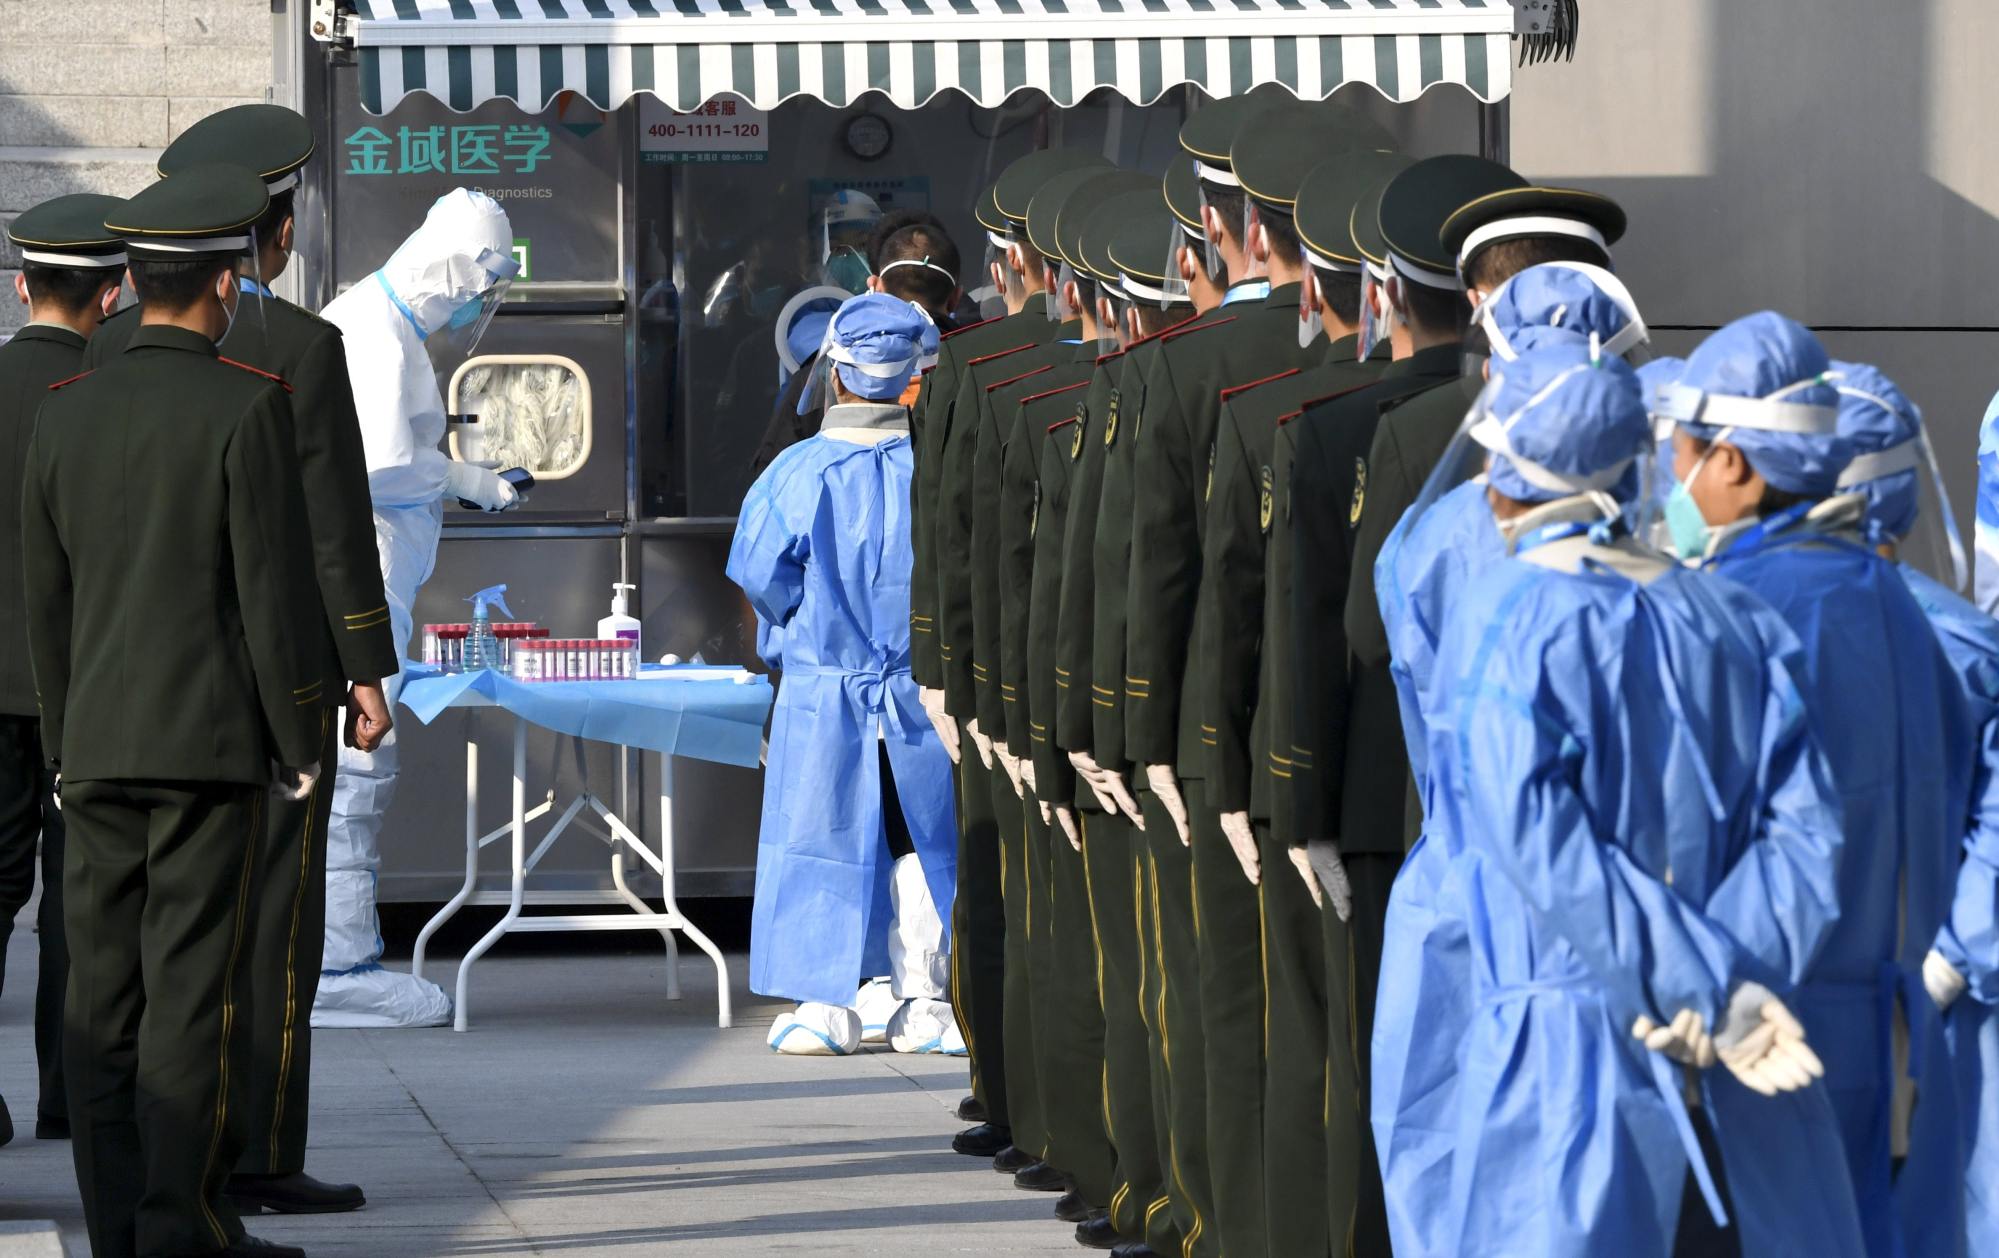 Chinese soldiers in the queue for coronavirus tests. Photo: dpa